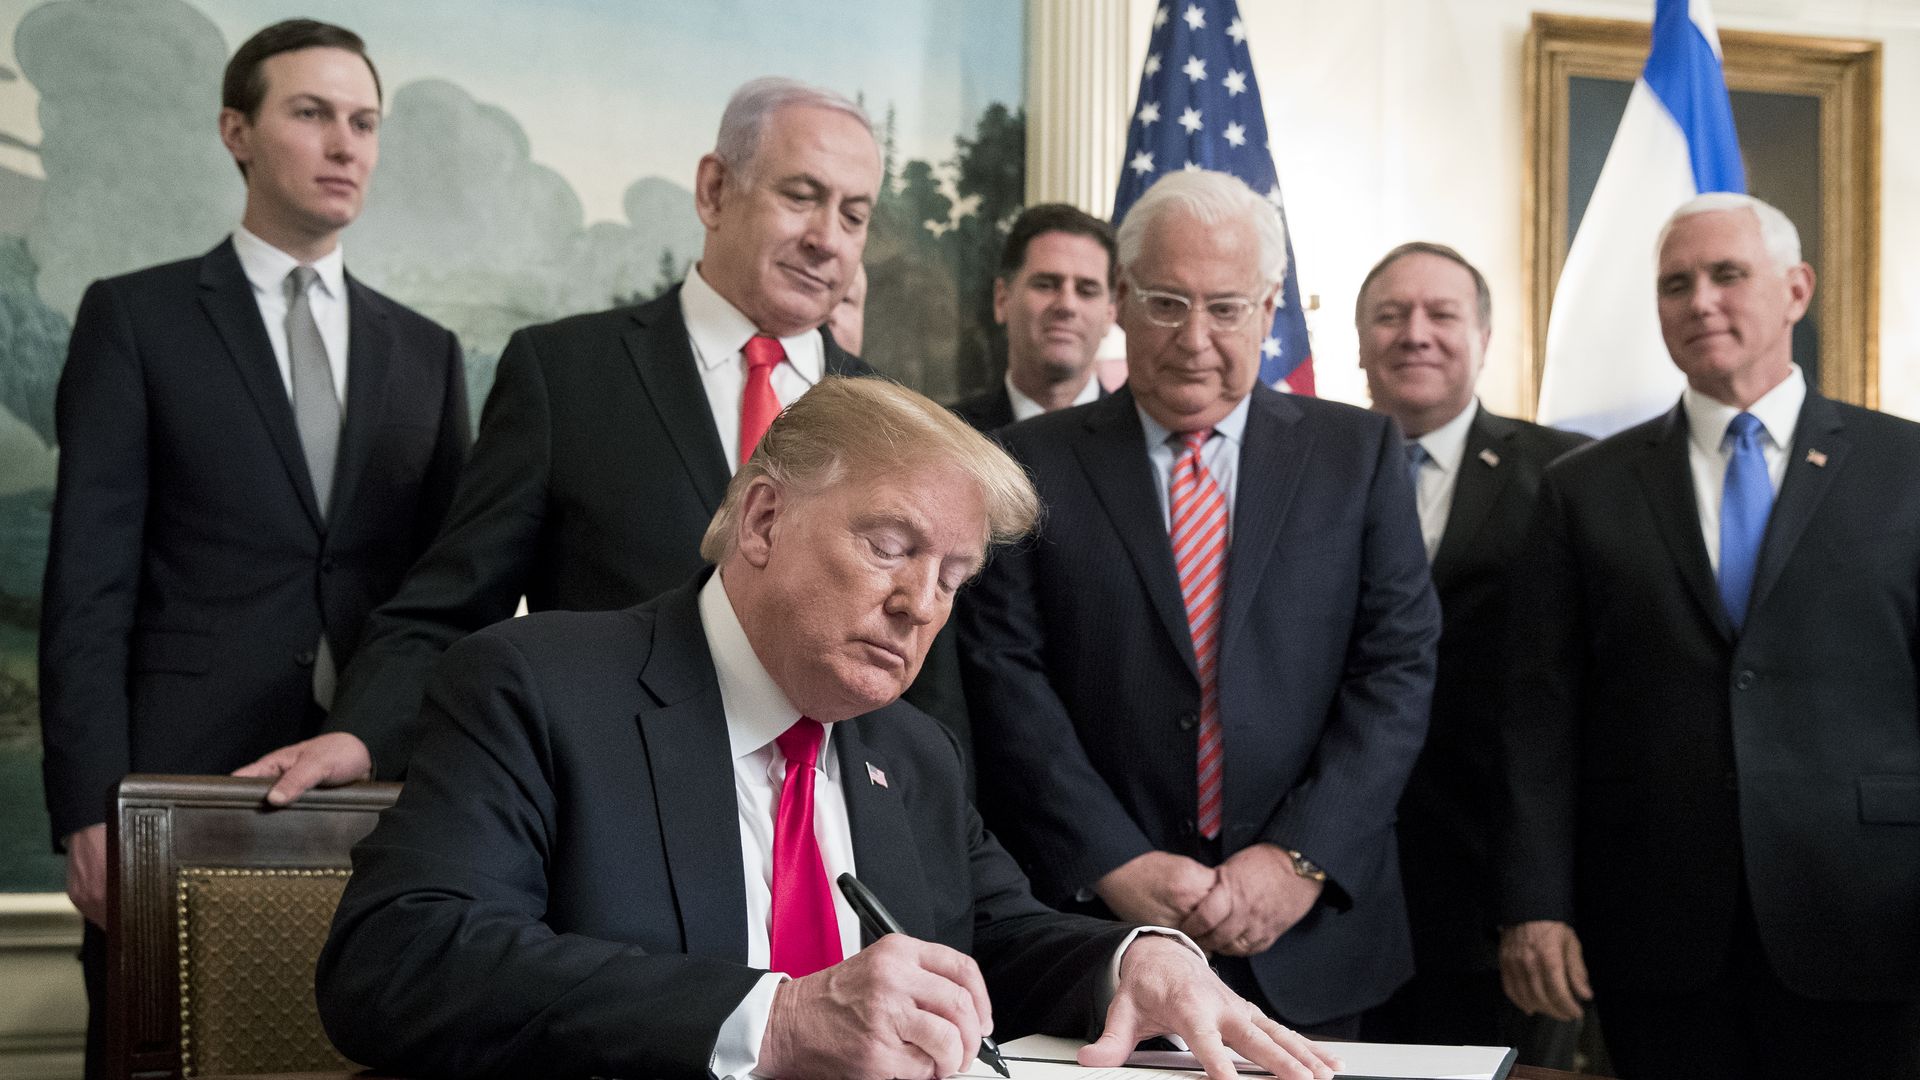 Trump signing a proclamation with Israeli leaders